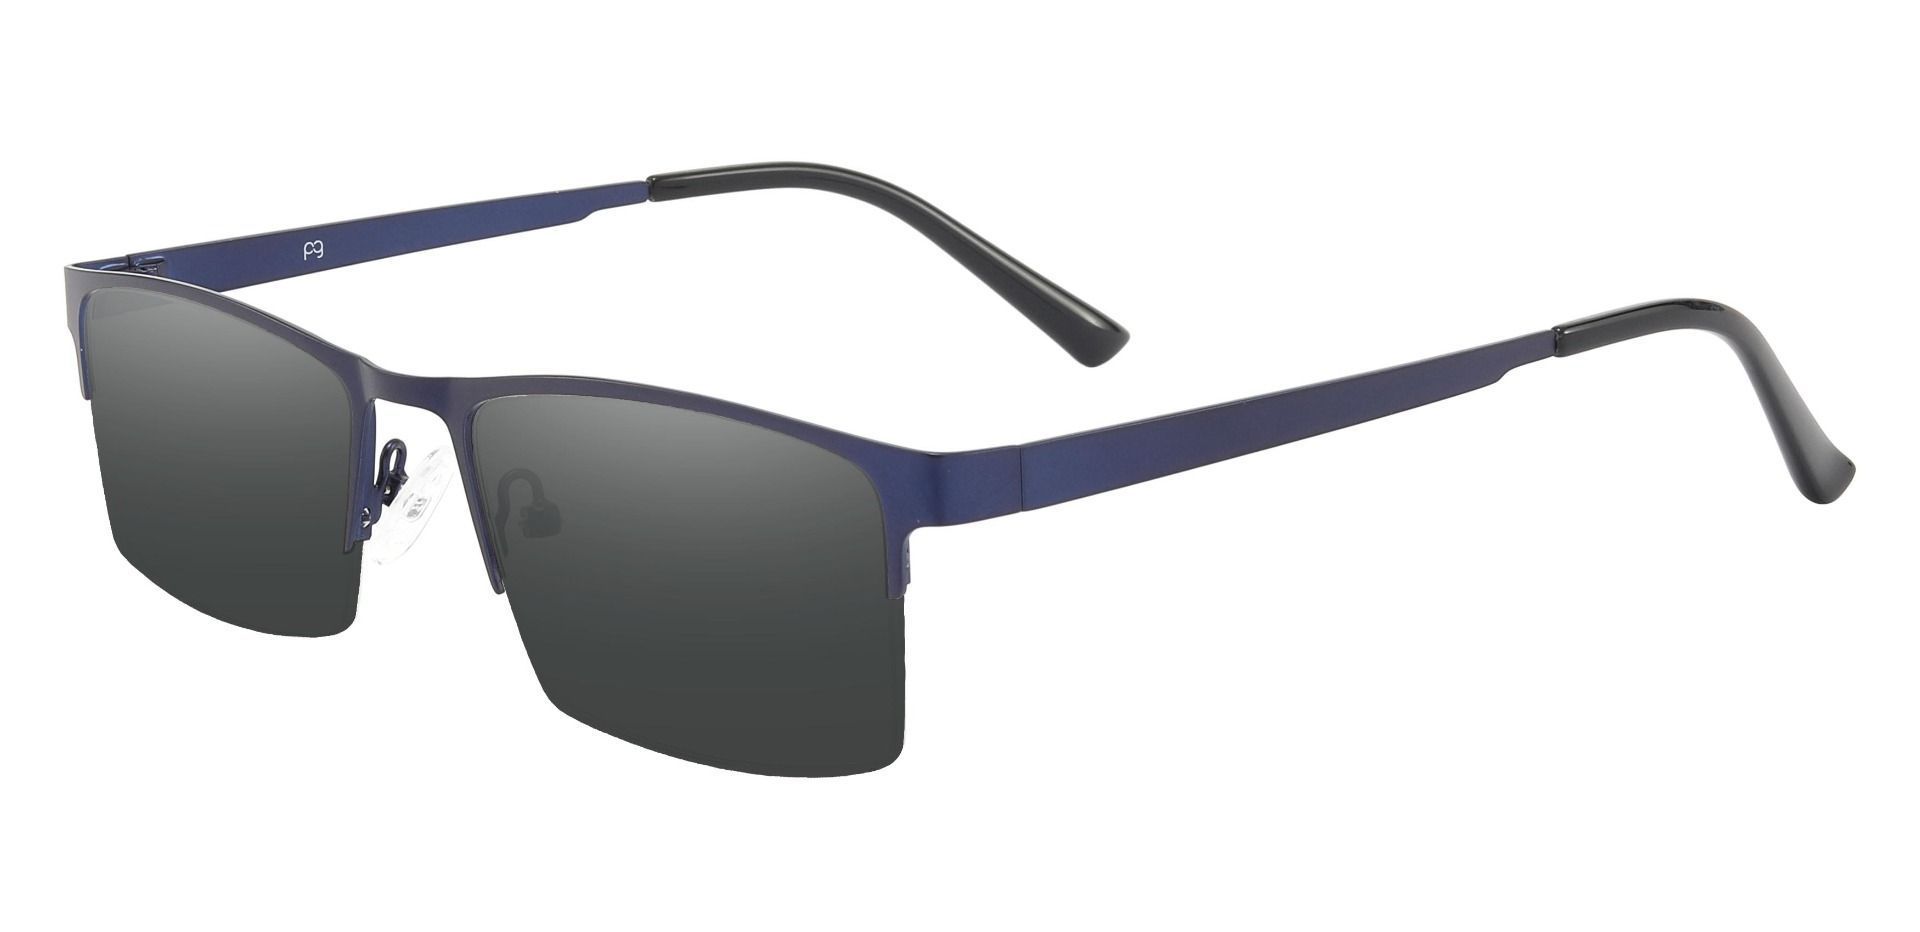 Patrick Rectangle Reading Sunglasses - Blue Frame With Gray Lenses